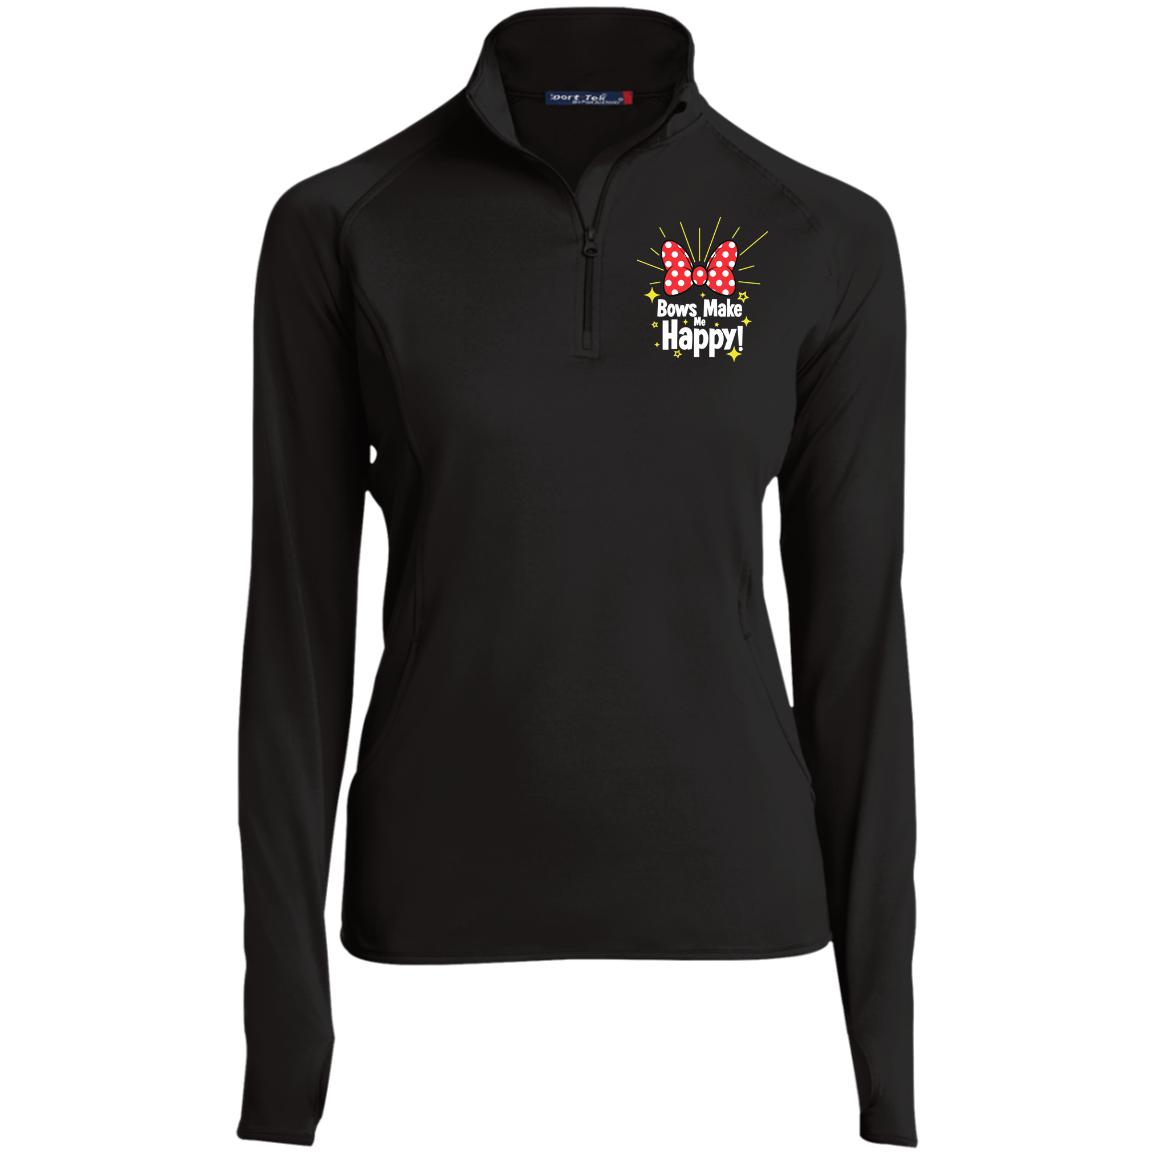 Bows Make Me Happy - Embroidered Sport-Tek Women's 1/2 Zip Performance Pullover